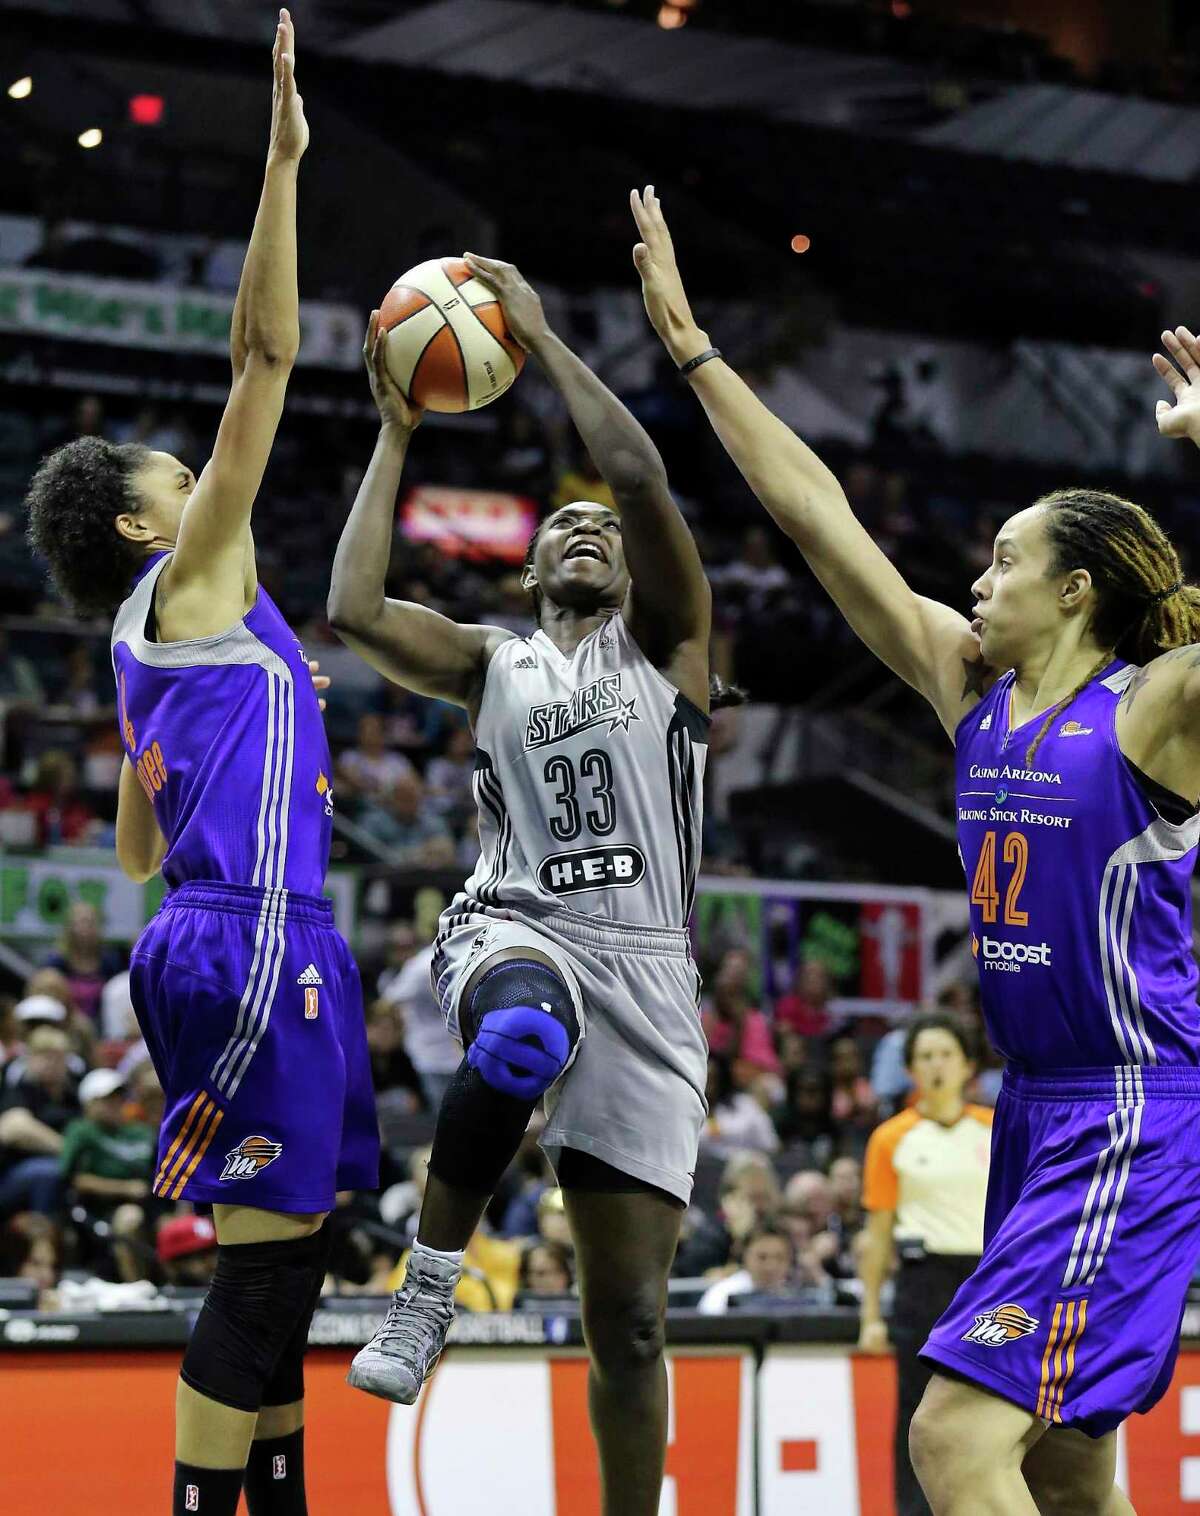 San Antonio Stars' Sophia Young-Malcolm shoots between Phoenix Mercury's Candice Dupree (left) and Brittney Griner during their WNBA game Saturday June 7, 2014 at the AT&T Center. The Mercury won in double overtime 91-79.